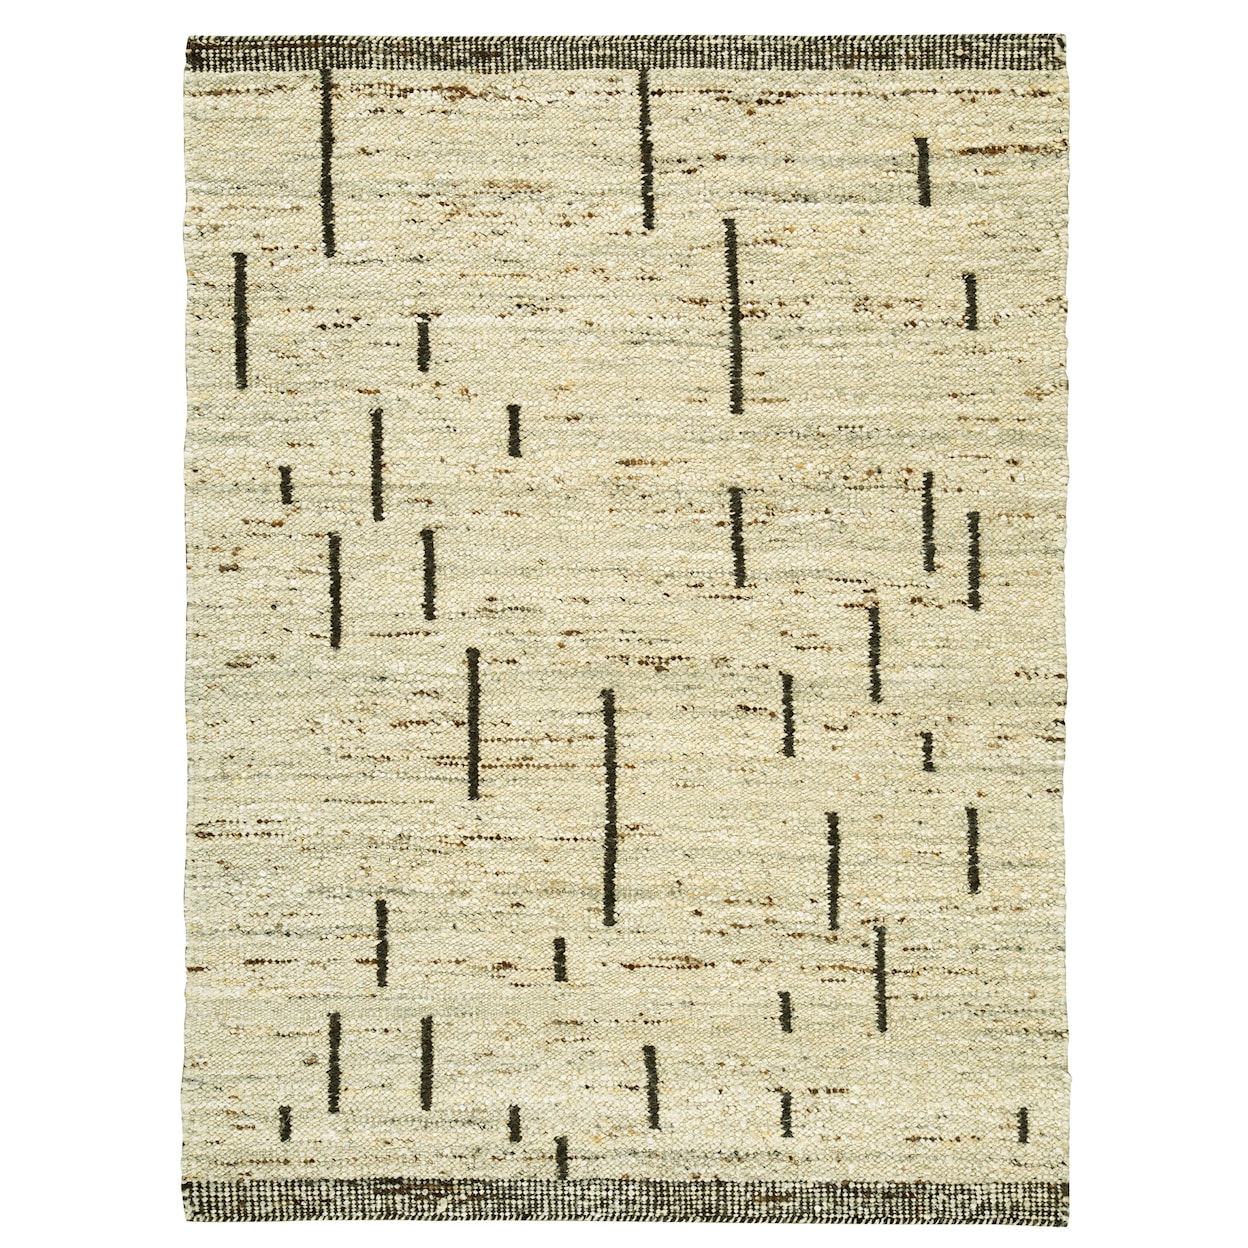 Benchcraft Casual Area Rugs Mortis 5' x 7' Rug